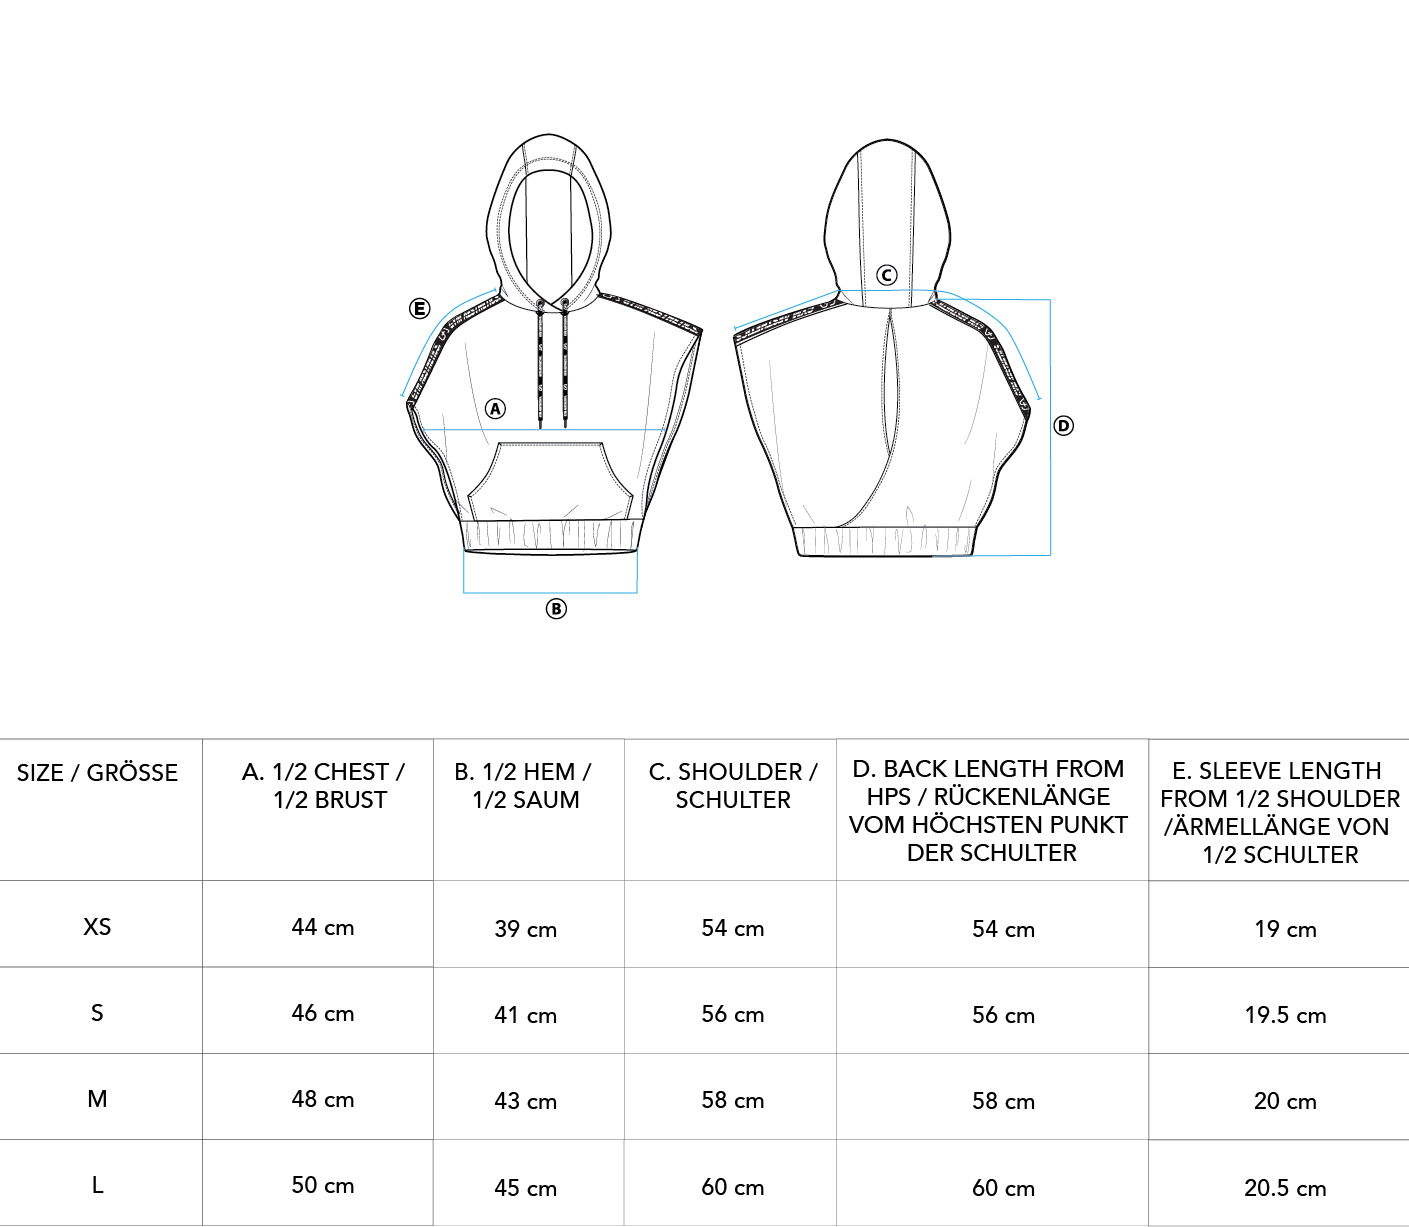 Athleisure Trendy Hoodie for Women - size chart | Gym Aesthetics